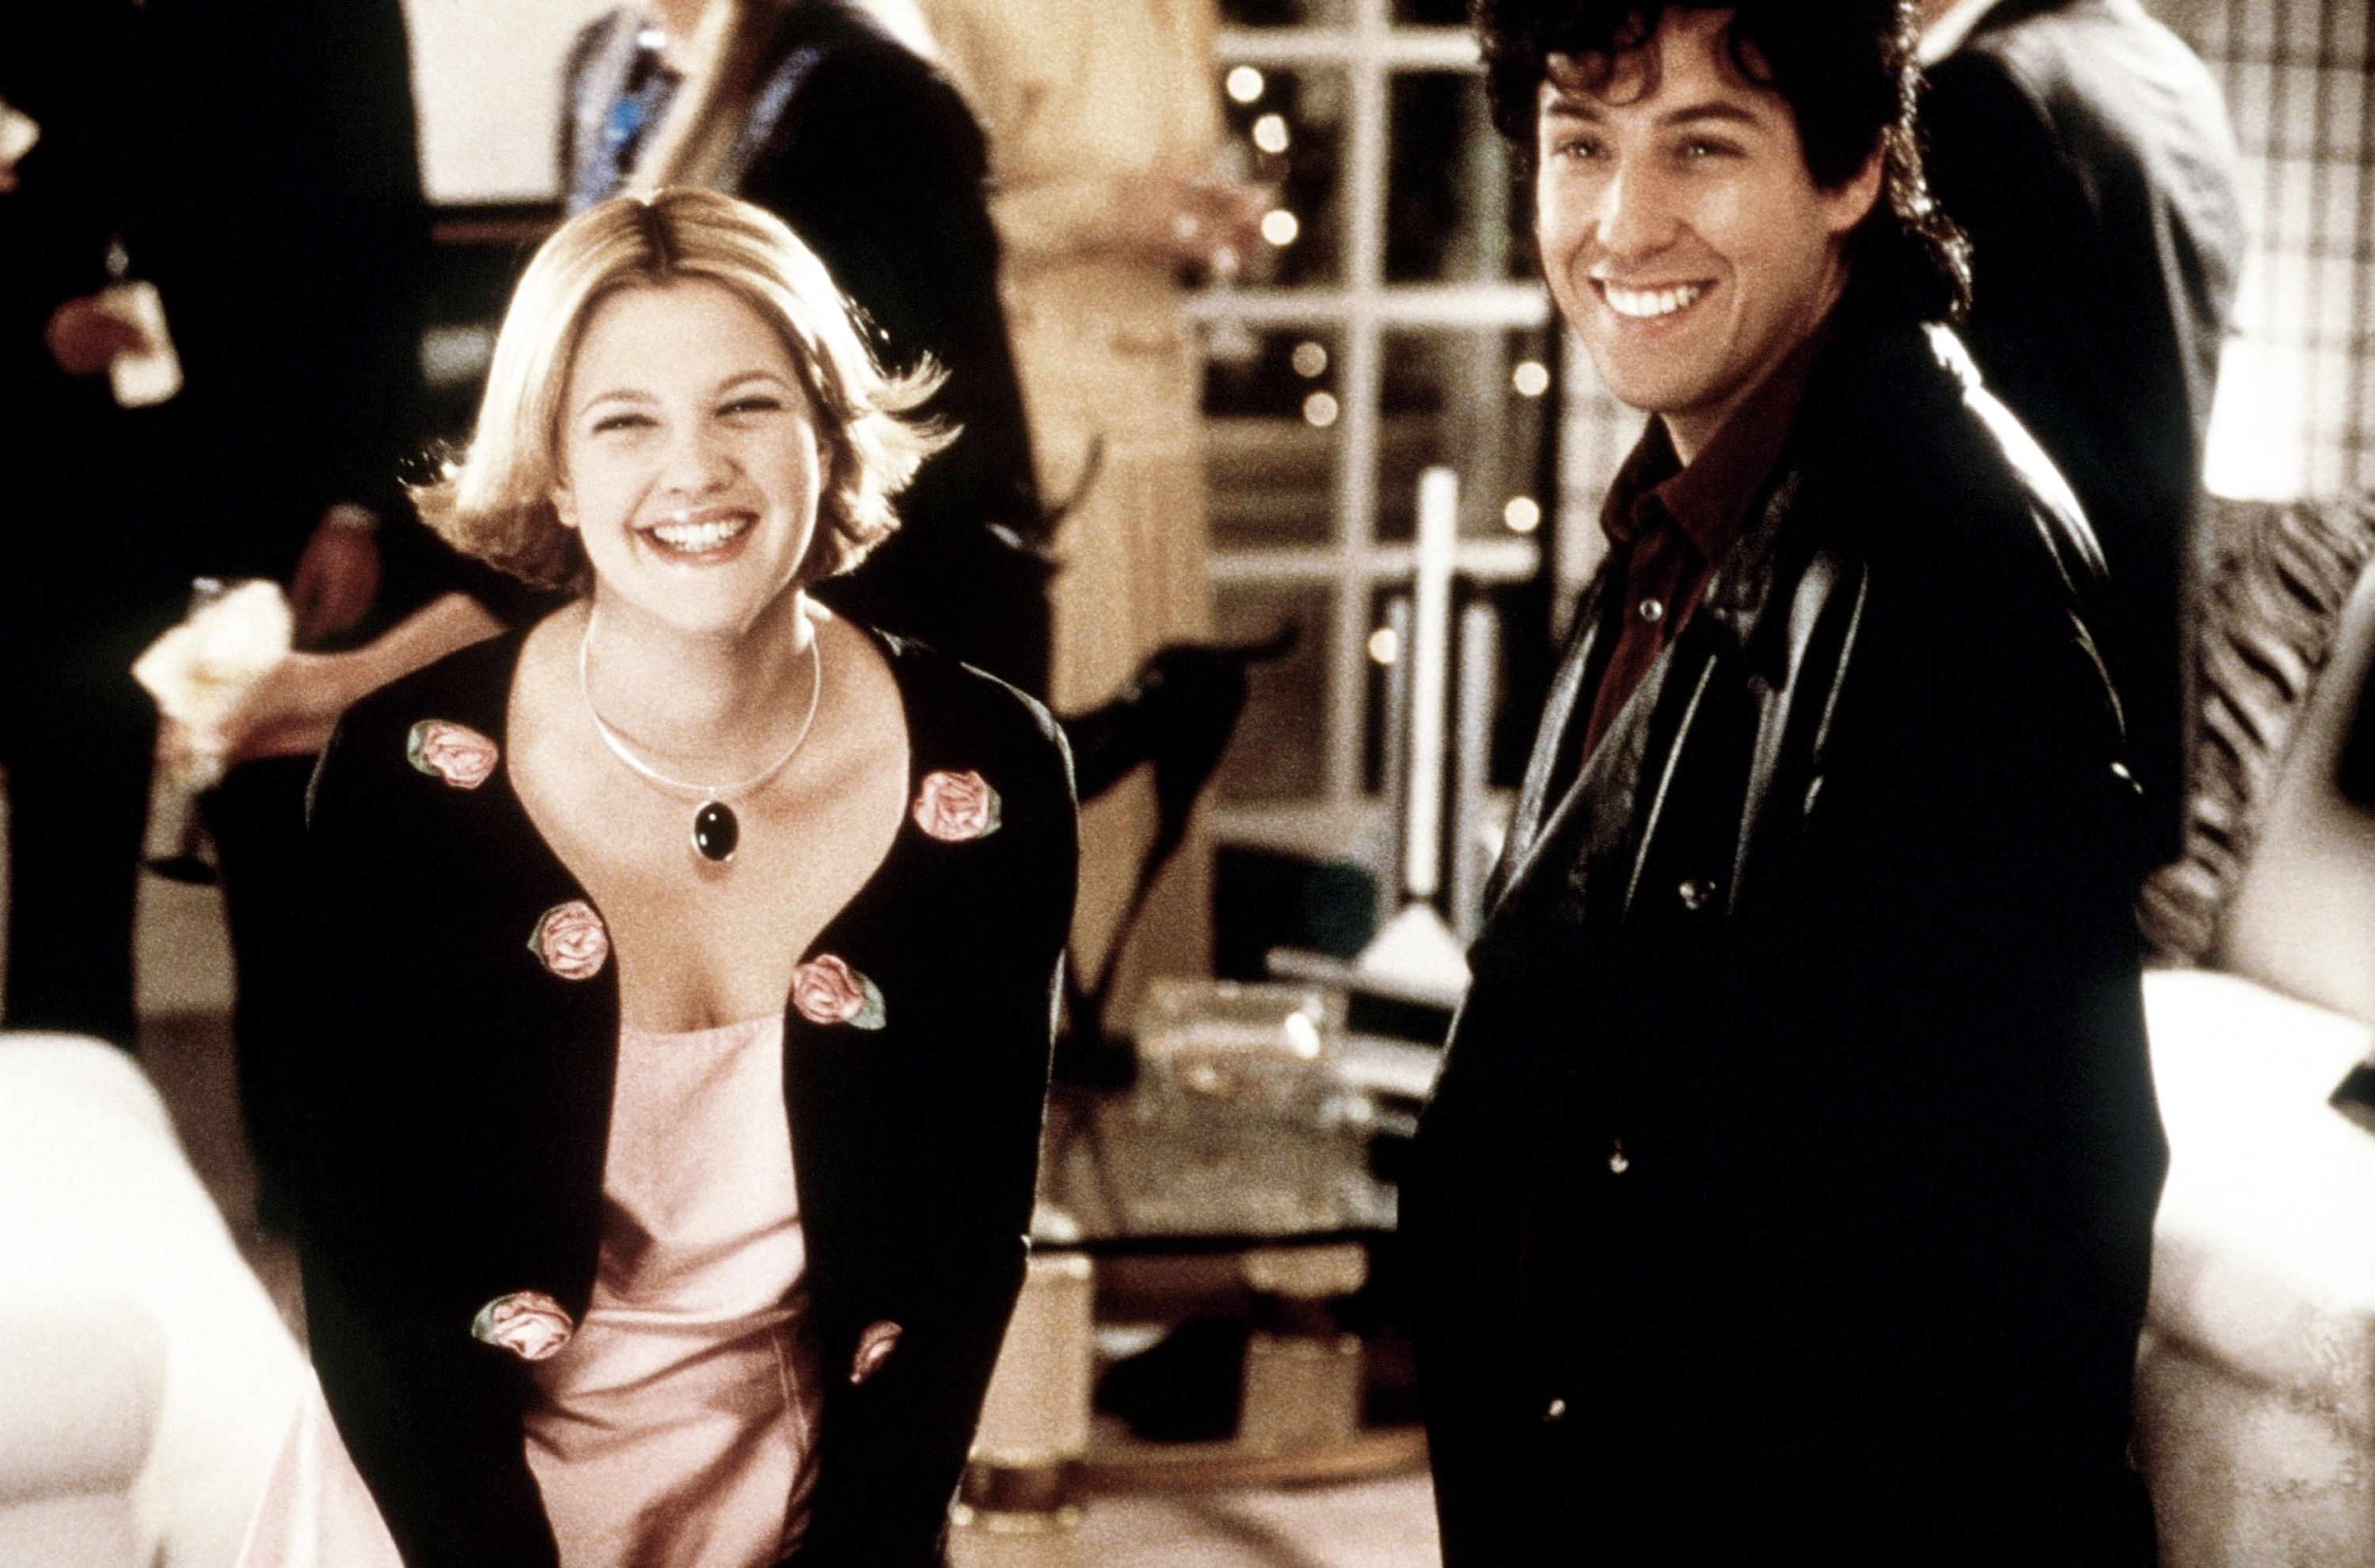 Drew Barrymore in a pink dress and Adam Sandler in a leather jacket smiling in a scene from a rom-com movie